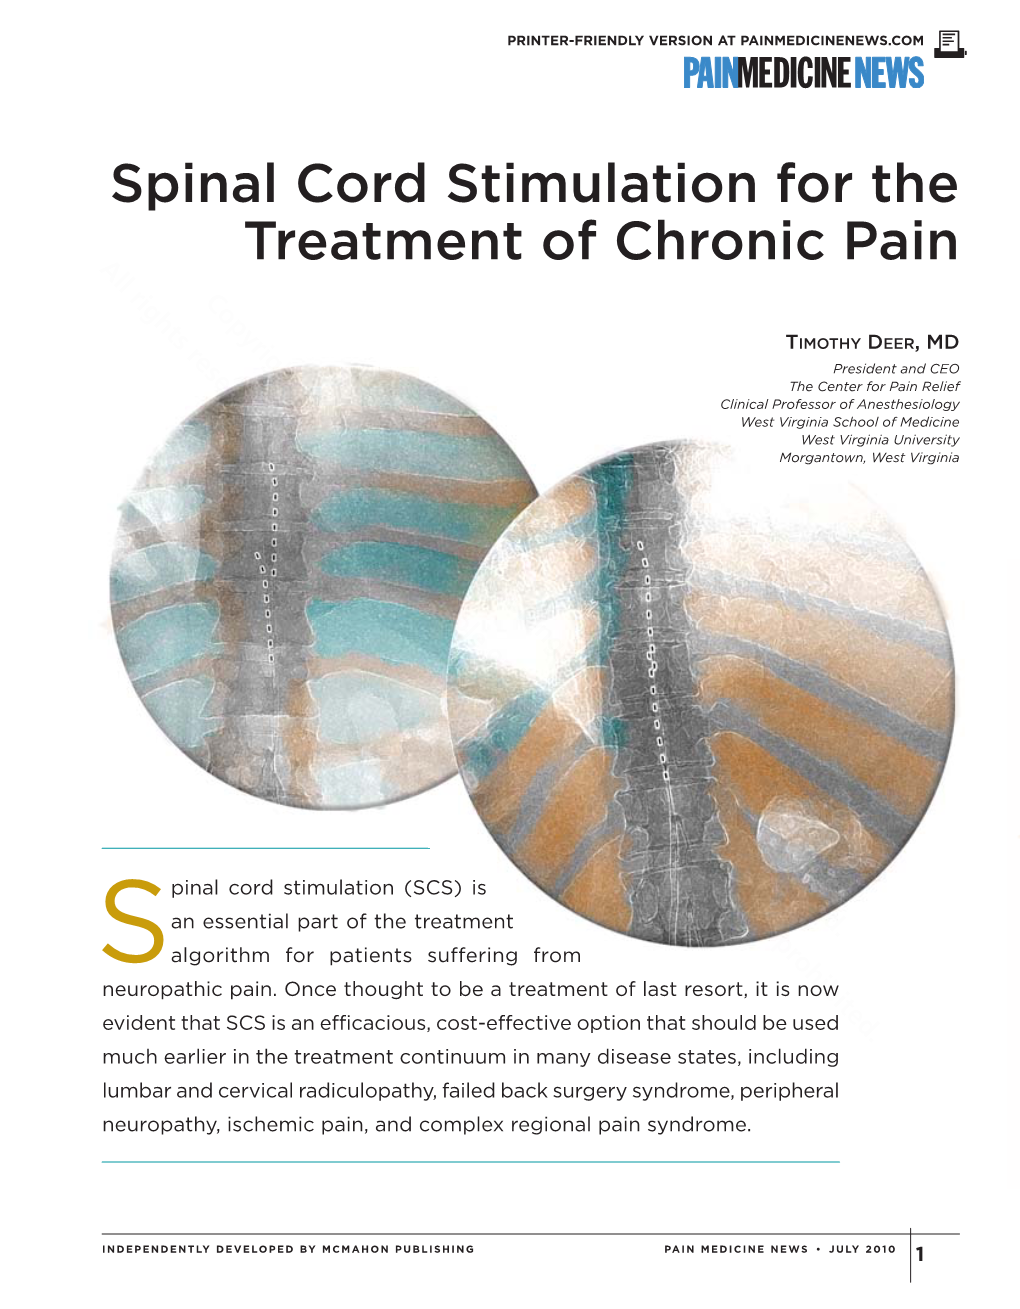 Spinal Cord Stimulation for the Treatment of Chronic Pain